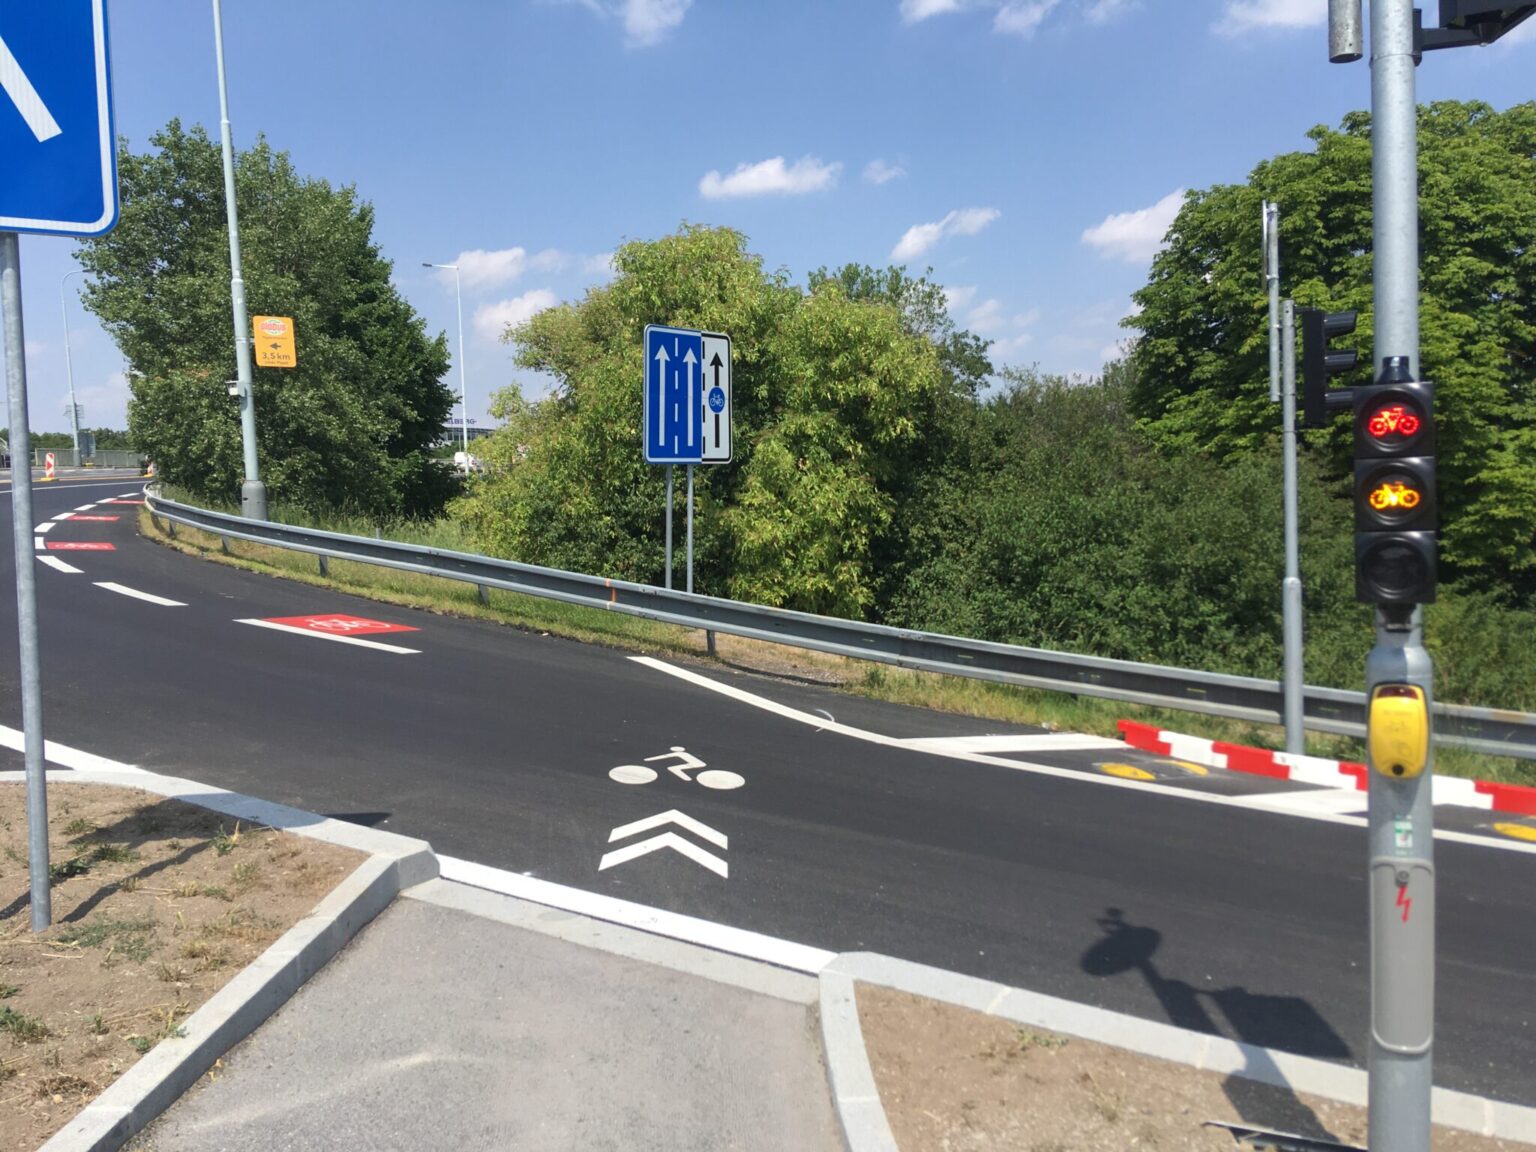 The intersection of the cyclist passage and the exit from Rozvadovská Spojka is now resolved with the help of a traffic light. It has an automatic detection system for approaching cyclists, which automatically stops the cars exiting from Rozvadovská Spojka at that moment. Zdroj: Jiří Motýl